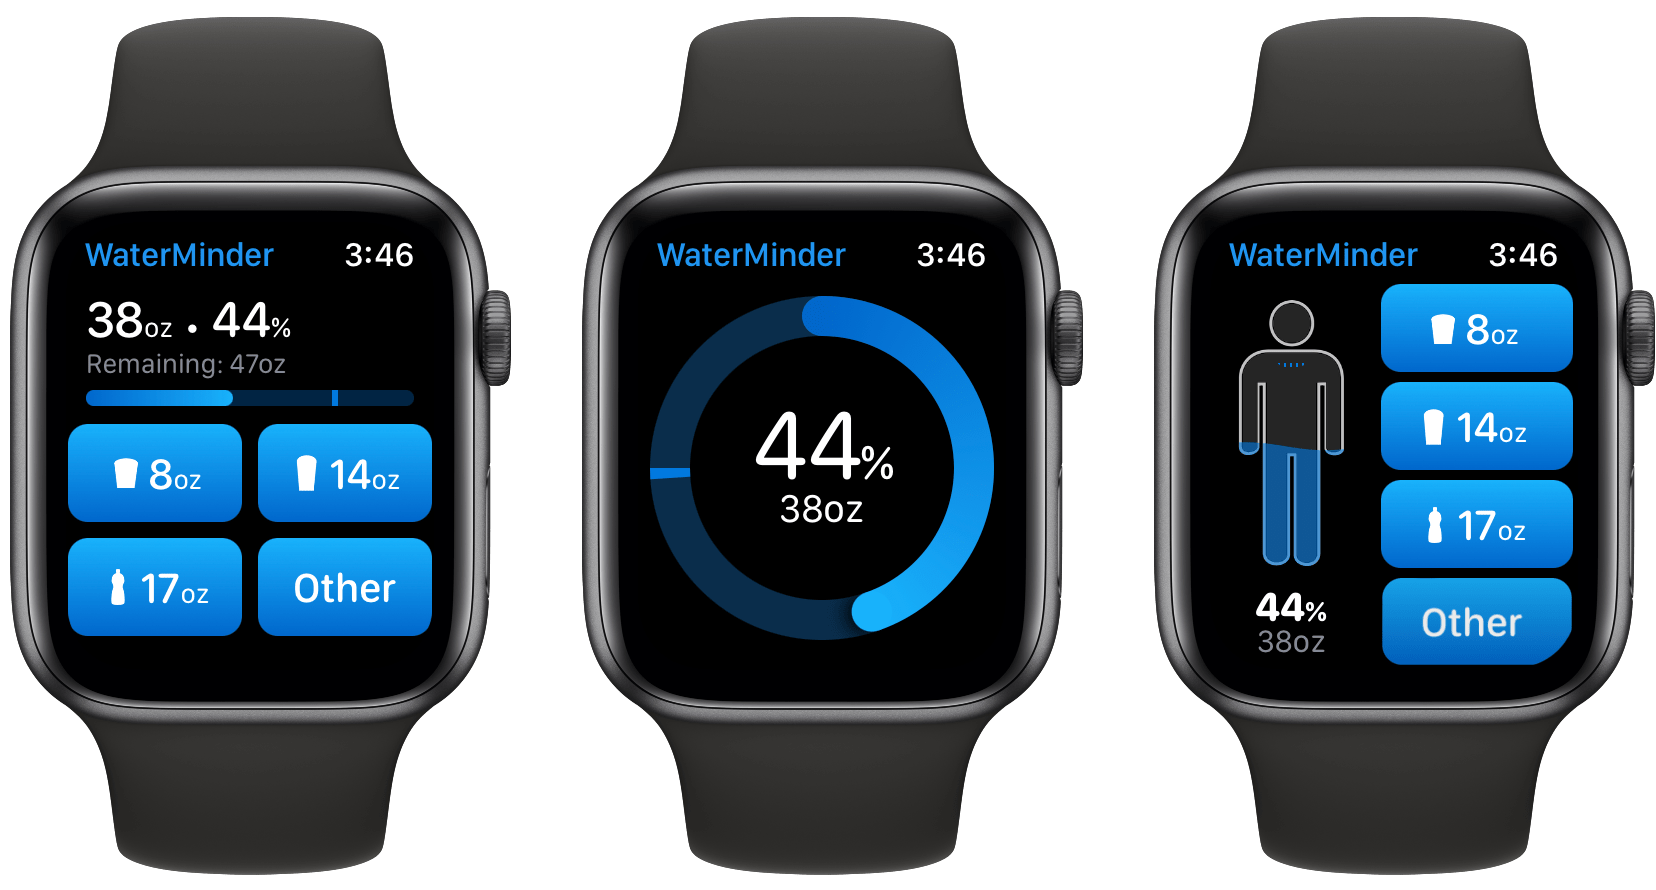 WaterMinder's Watch app features three different home screen layouts.